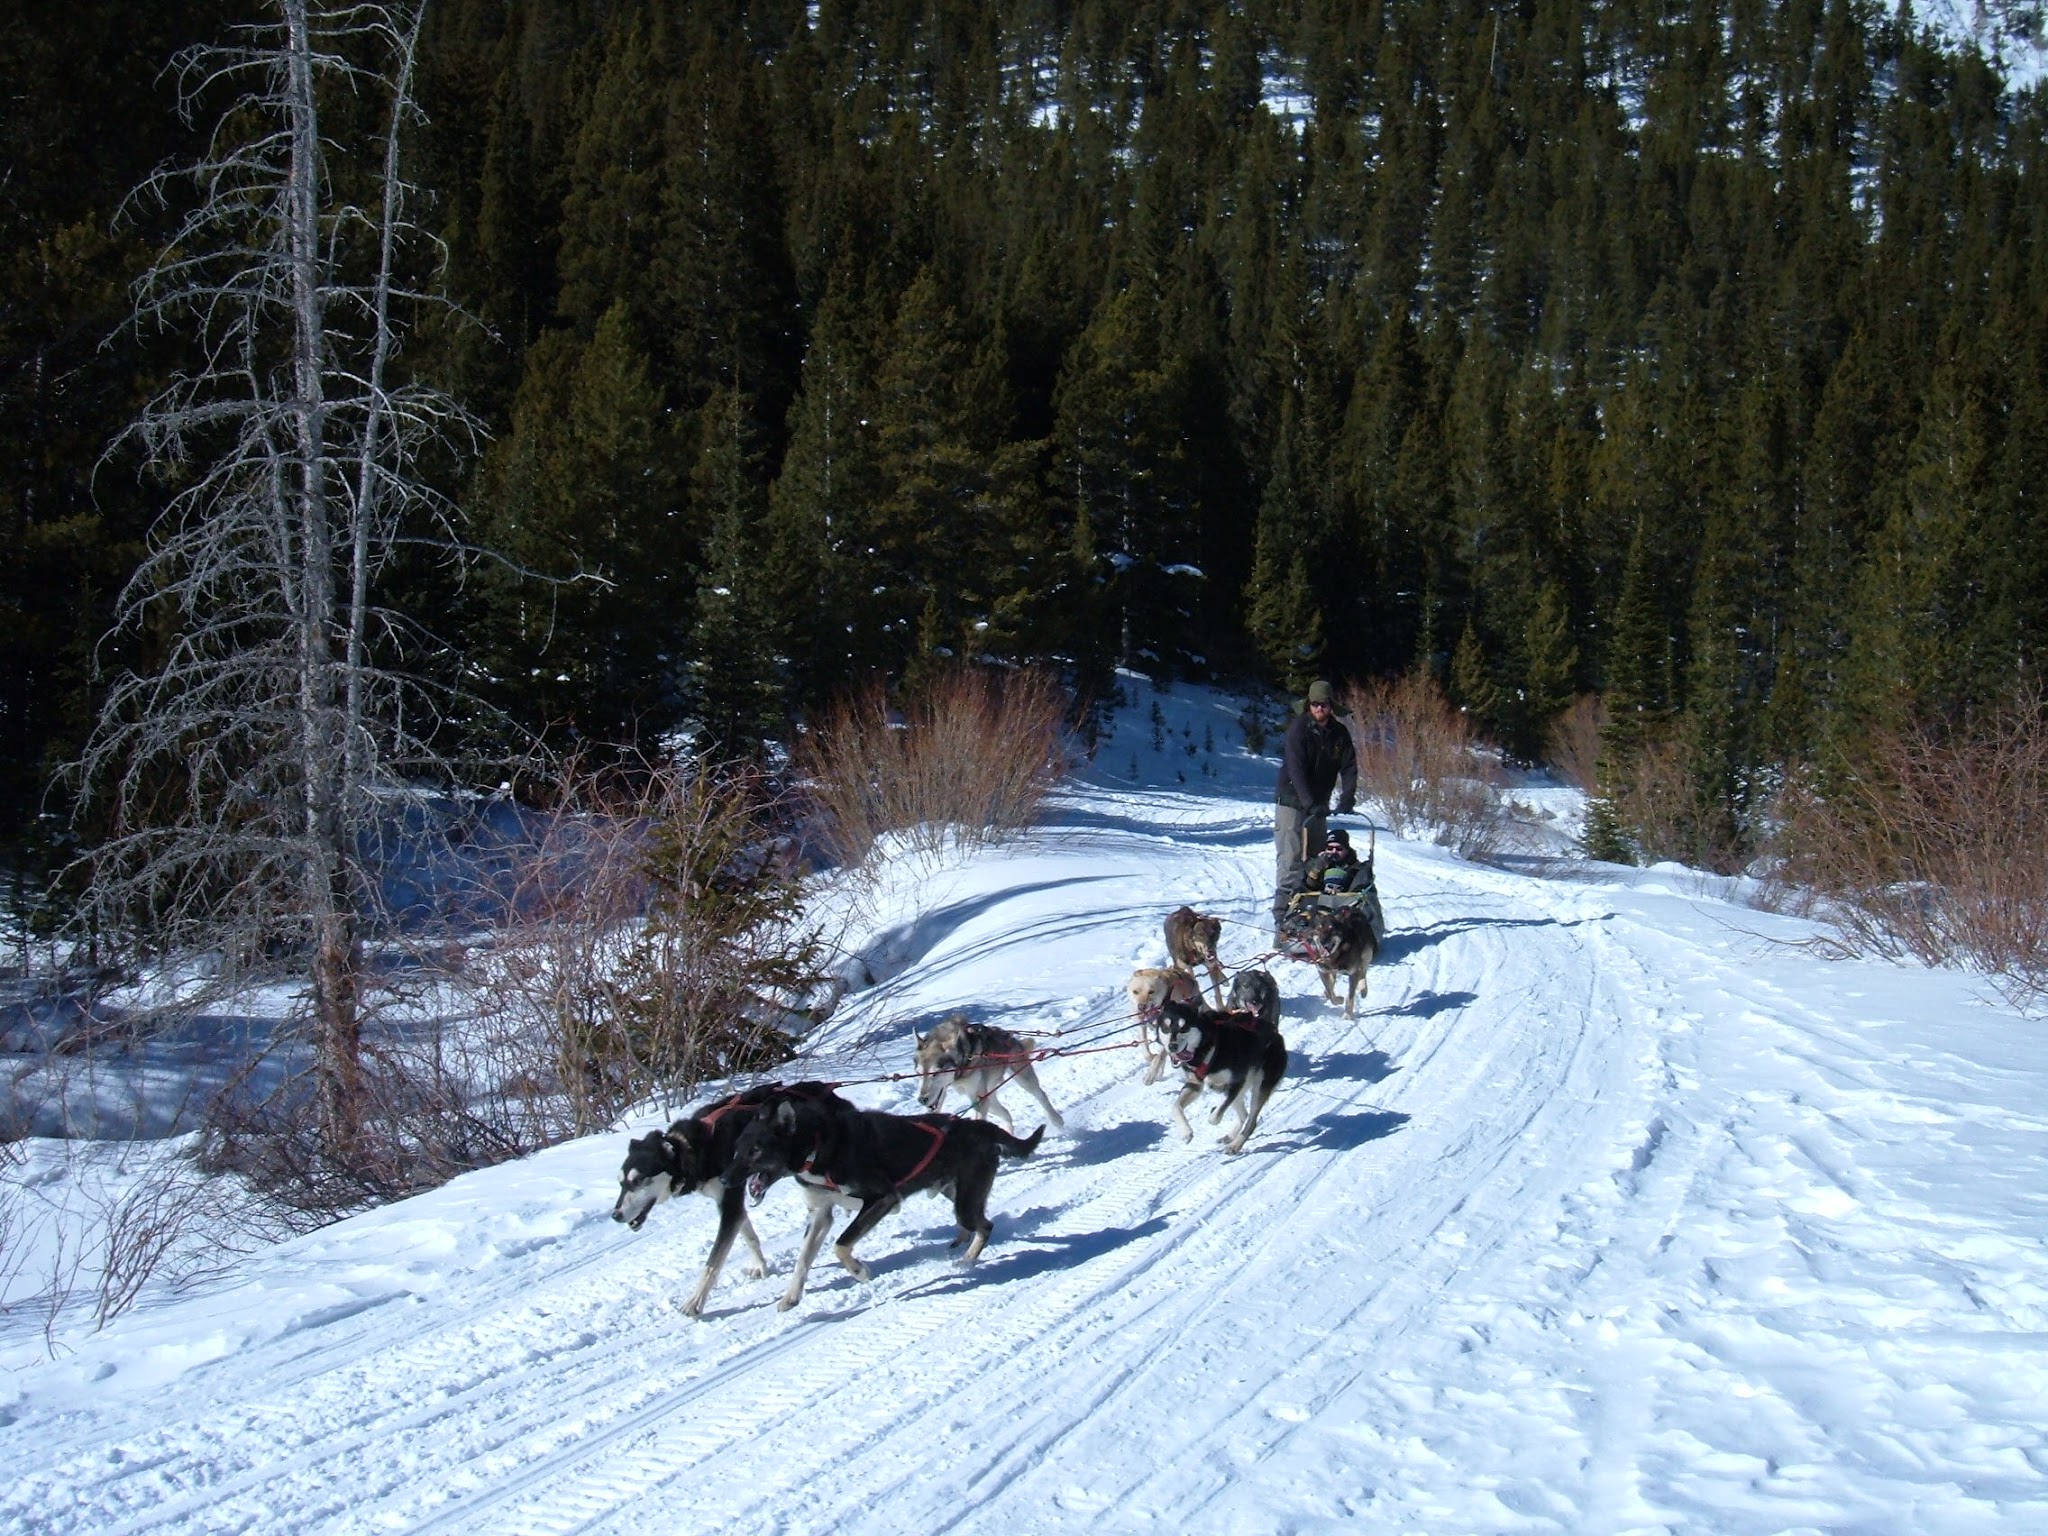 Dogsled ride in the mountains with trees all around.